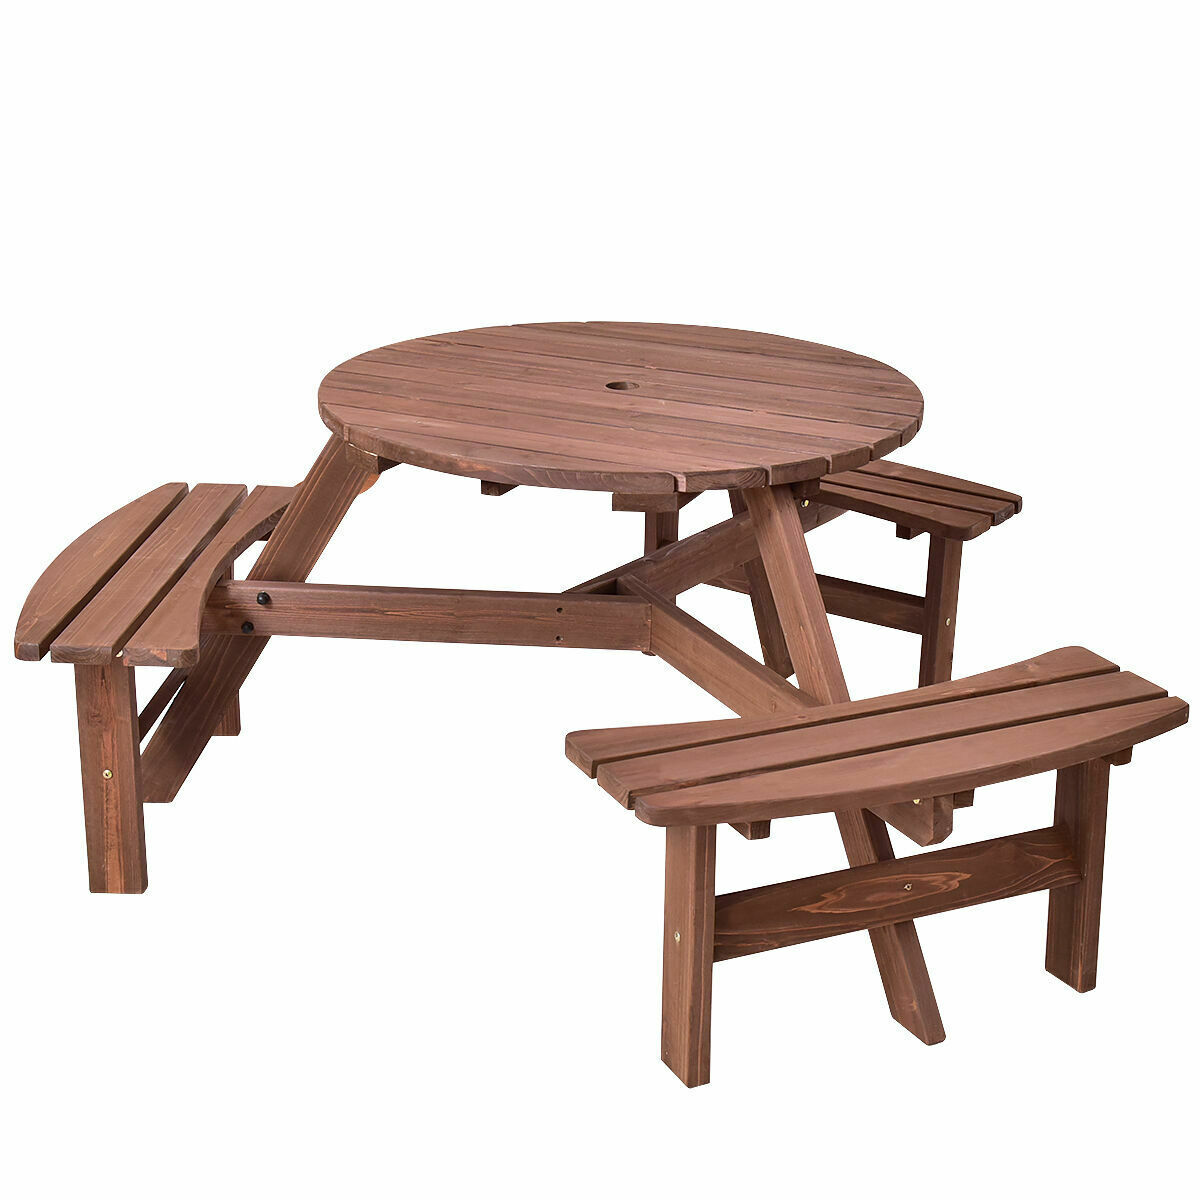 6 Person Patio Wood Picnic Table Beer Bench Set Pub Dining Seat Garden